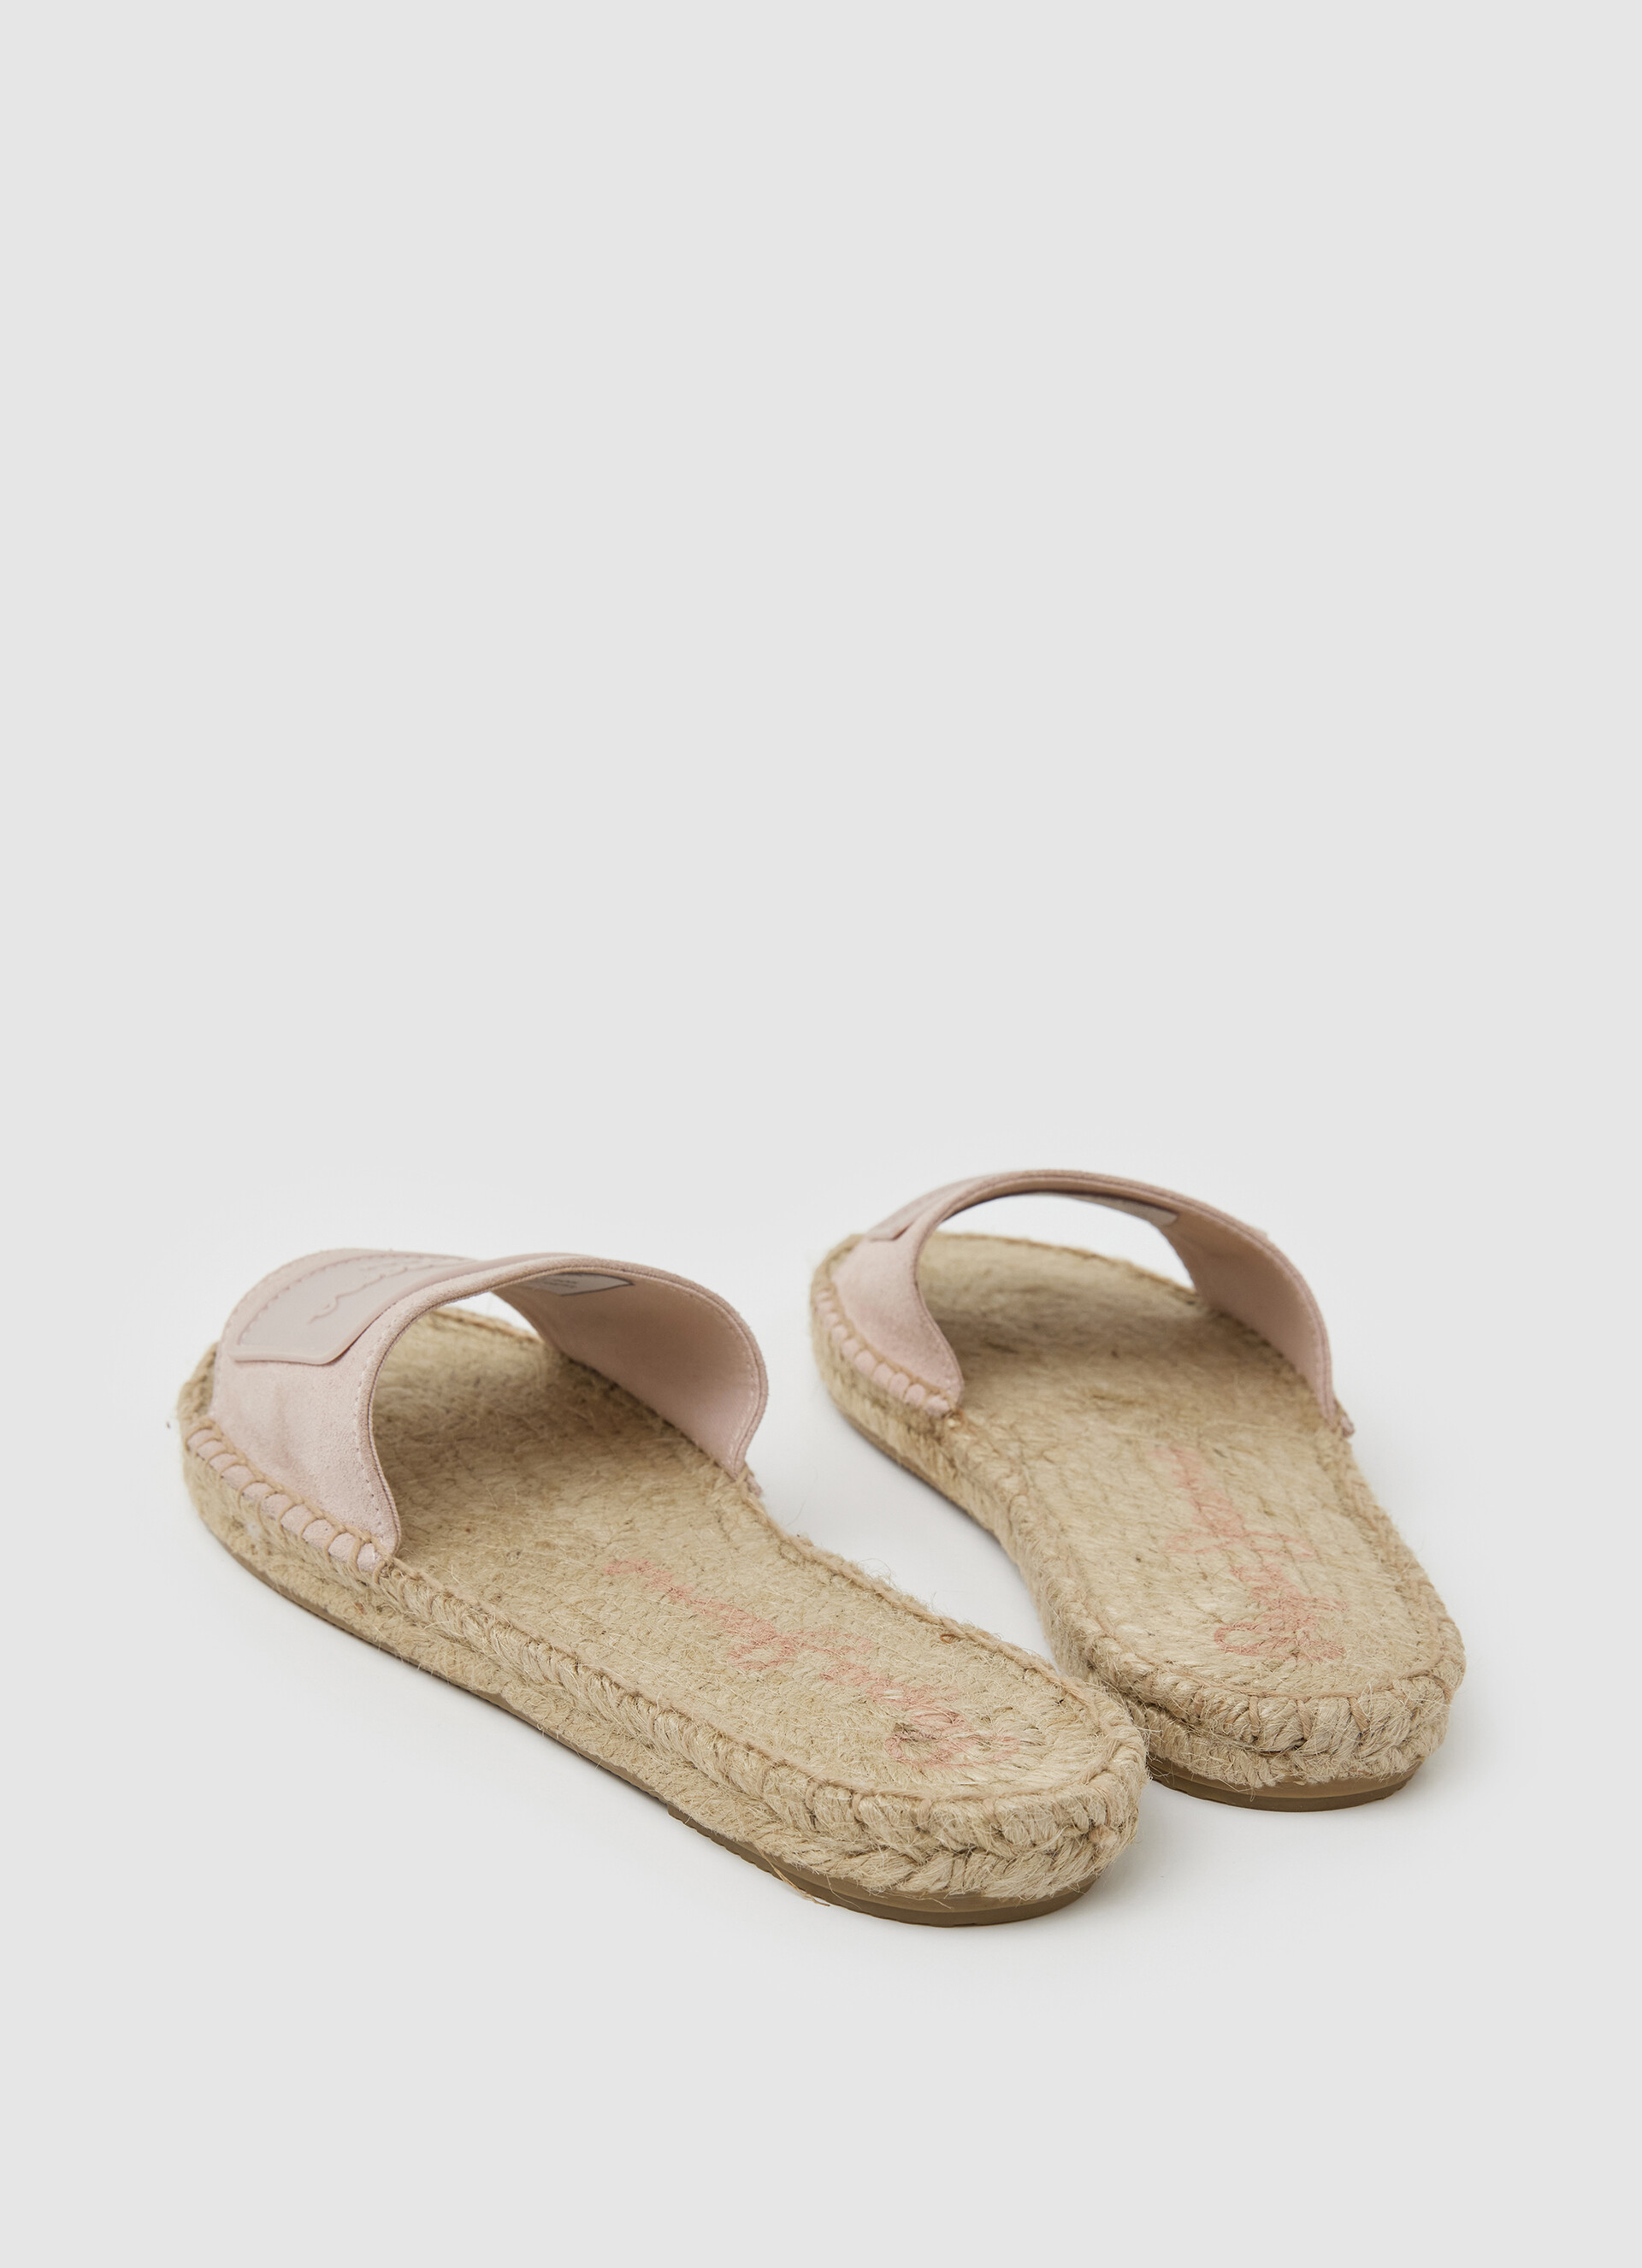 Siva Berry Leather Sandals | Pepe Jeans